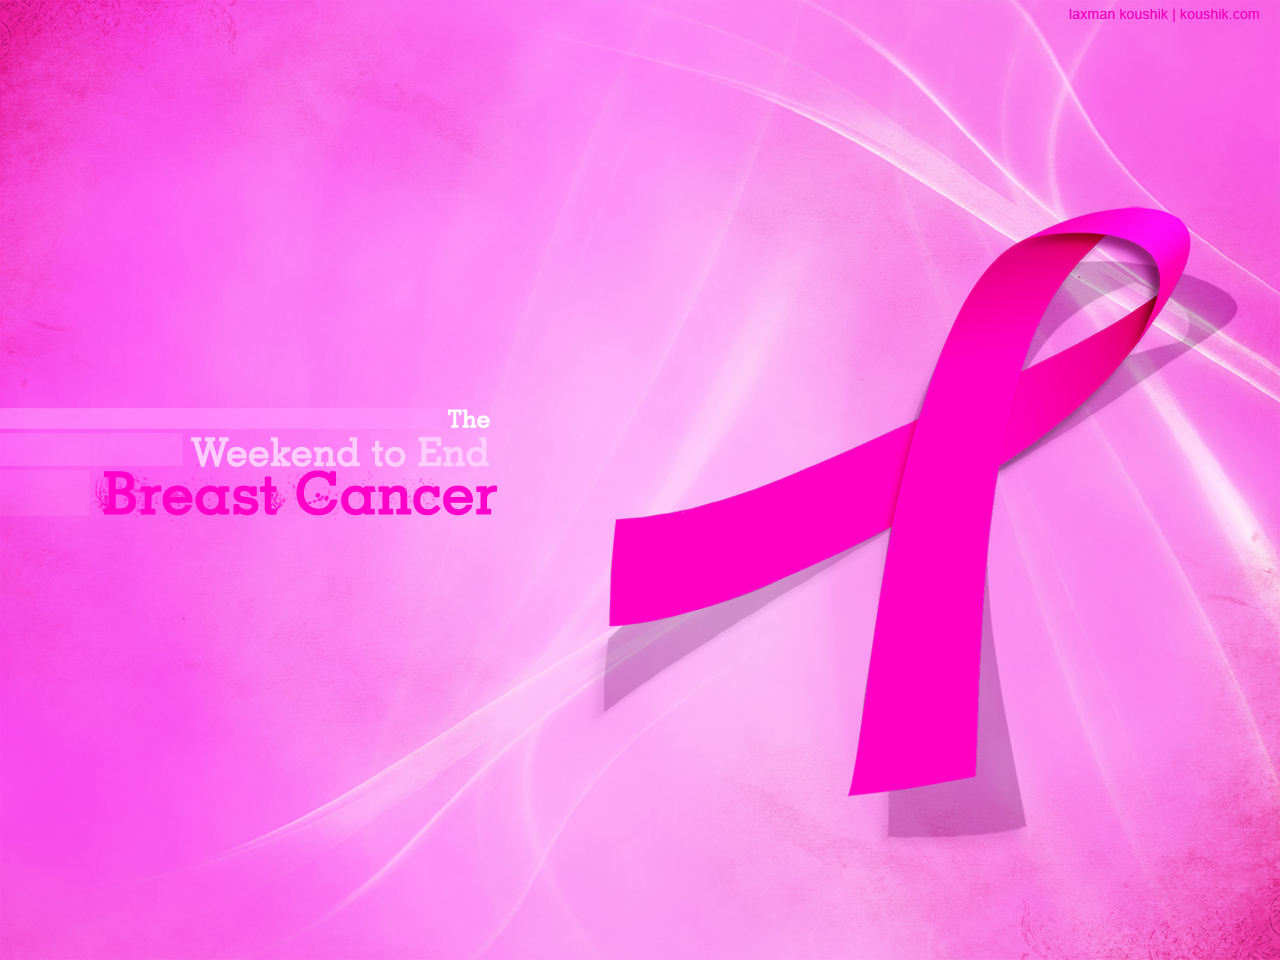 breast cancer wallpapers - Bing images